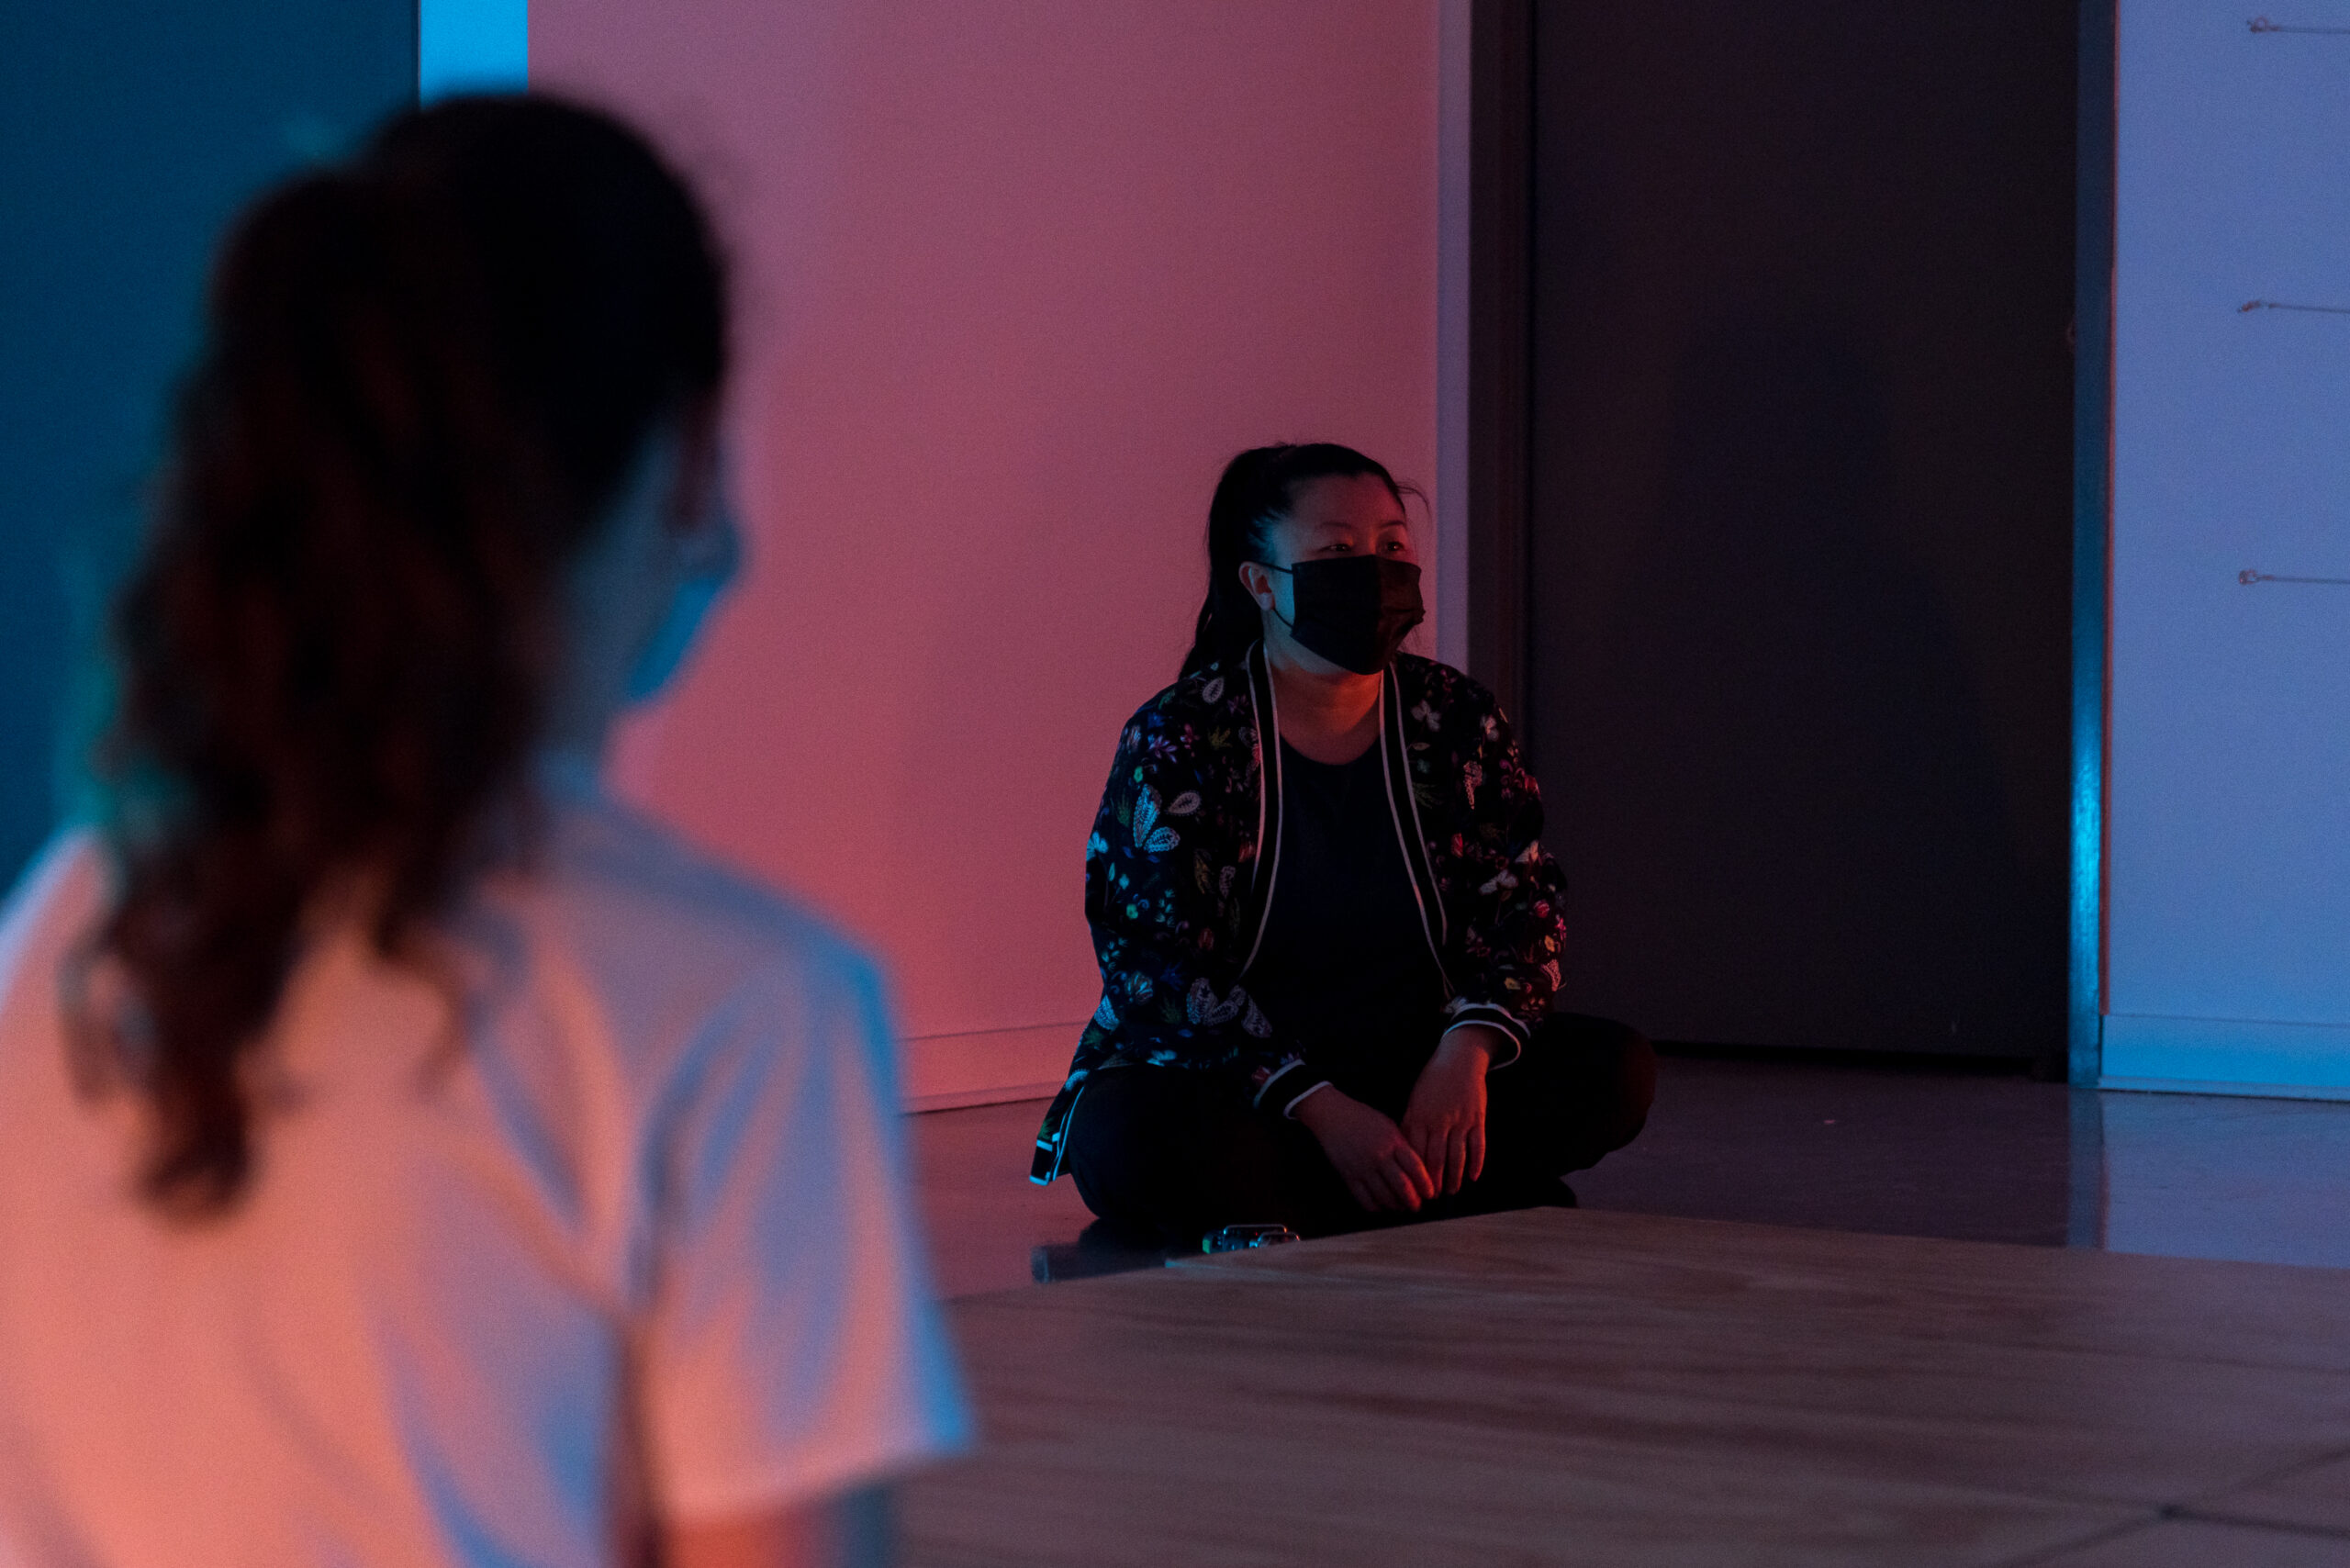 Embodied Resonance, creative and reflective workshop in collaboration with artist and filmmaker Victoria Catherine Chan and PHI Foundation for Contemporary Art as part of MOMENTA 2021. Photo: Jean-Michael Seminaro